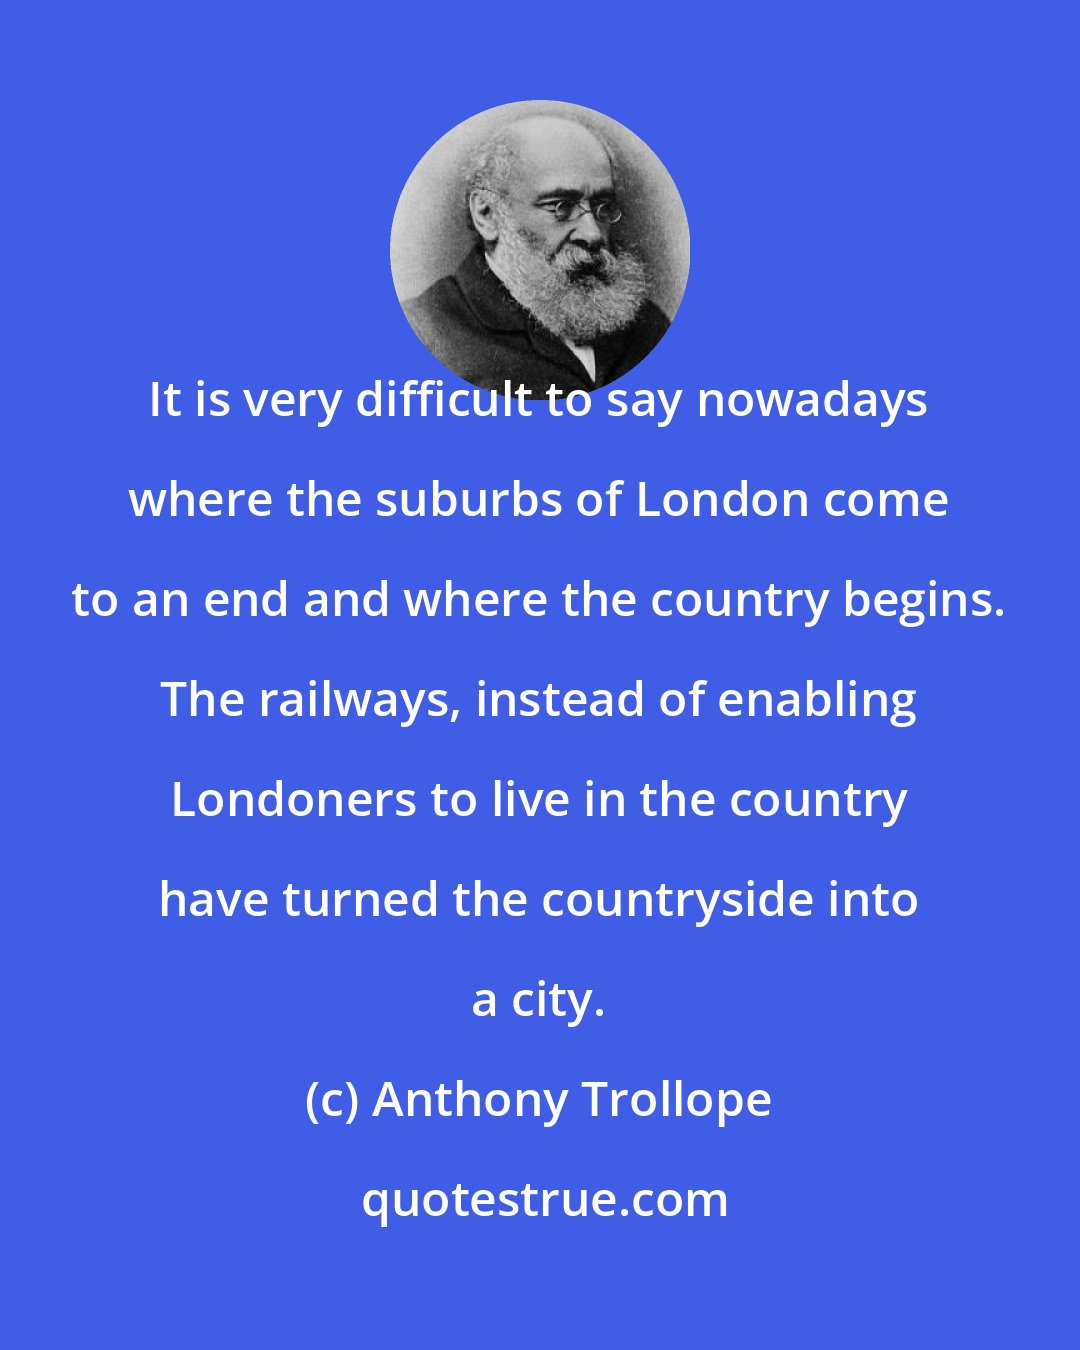 Anthony Trollope: It is very difficult to say nowadays where the suburbs of London come to an end and where the country begins. The railways, instead of enabling Londoners to live in the country have turned the countryside into a city.